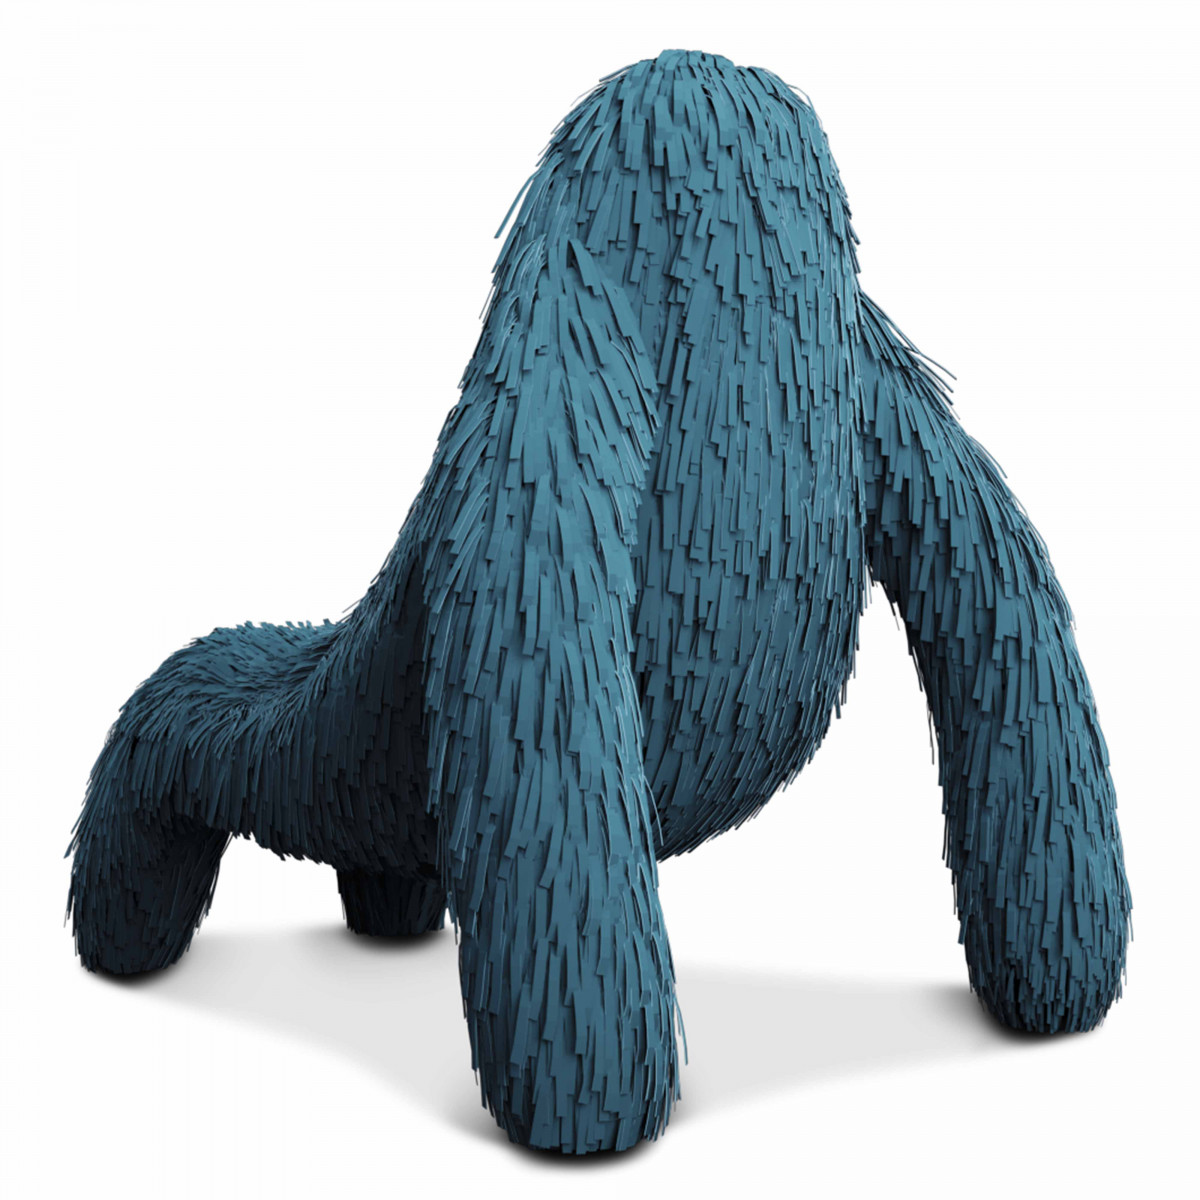 Gorilla Chair Teal is an ape shaped seat with a rich teal leather covering. A chair with a fantastic, unique shape